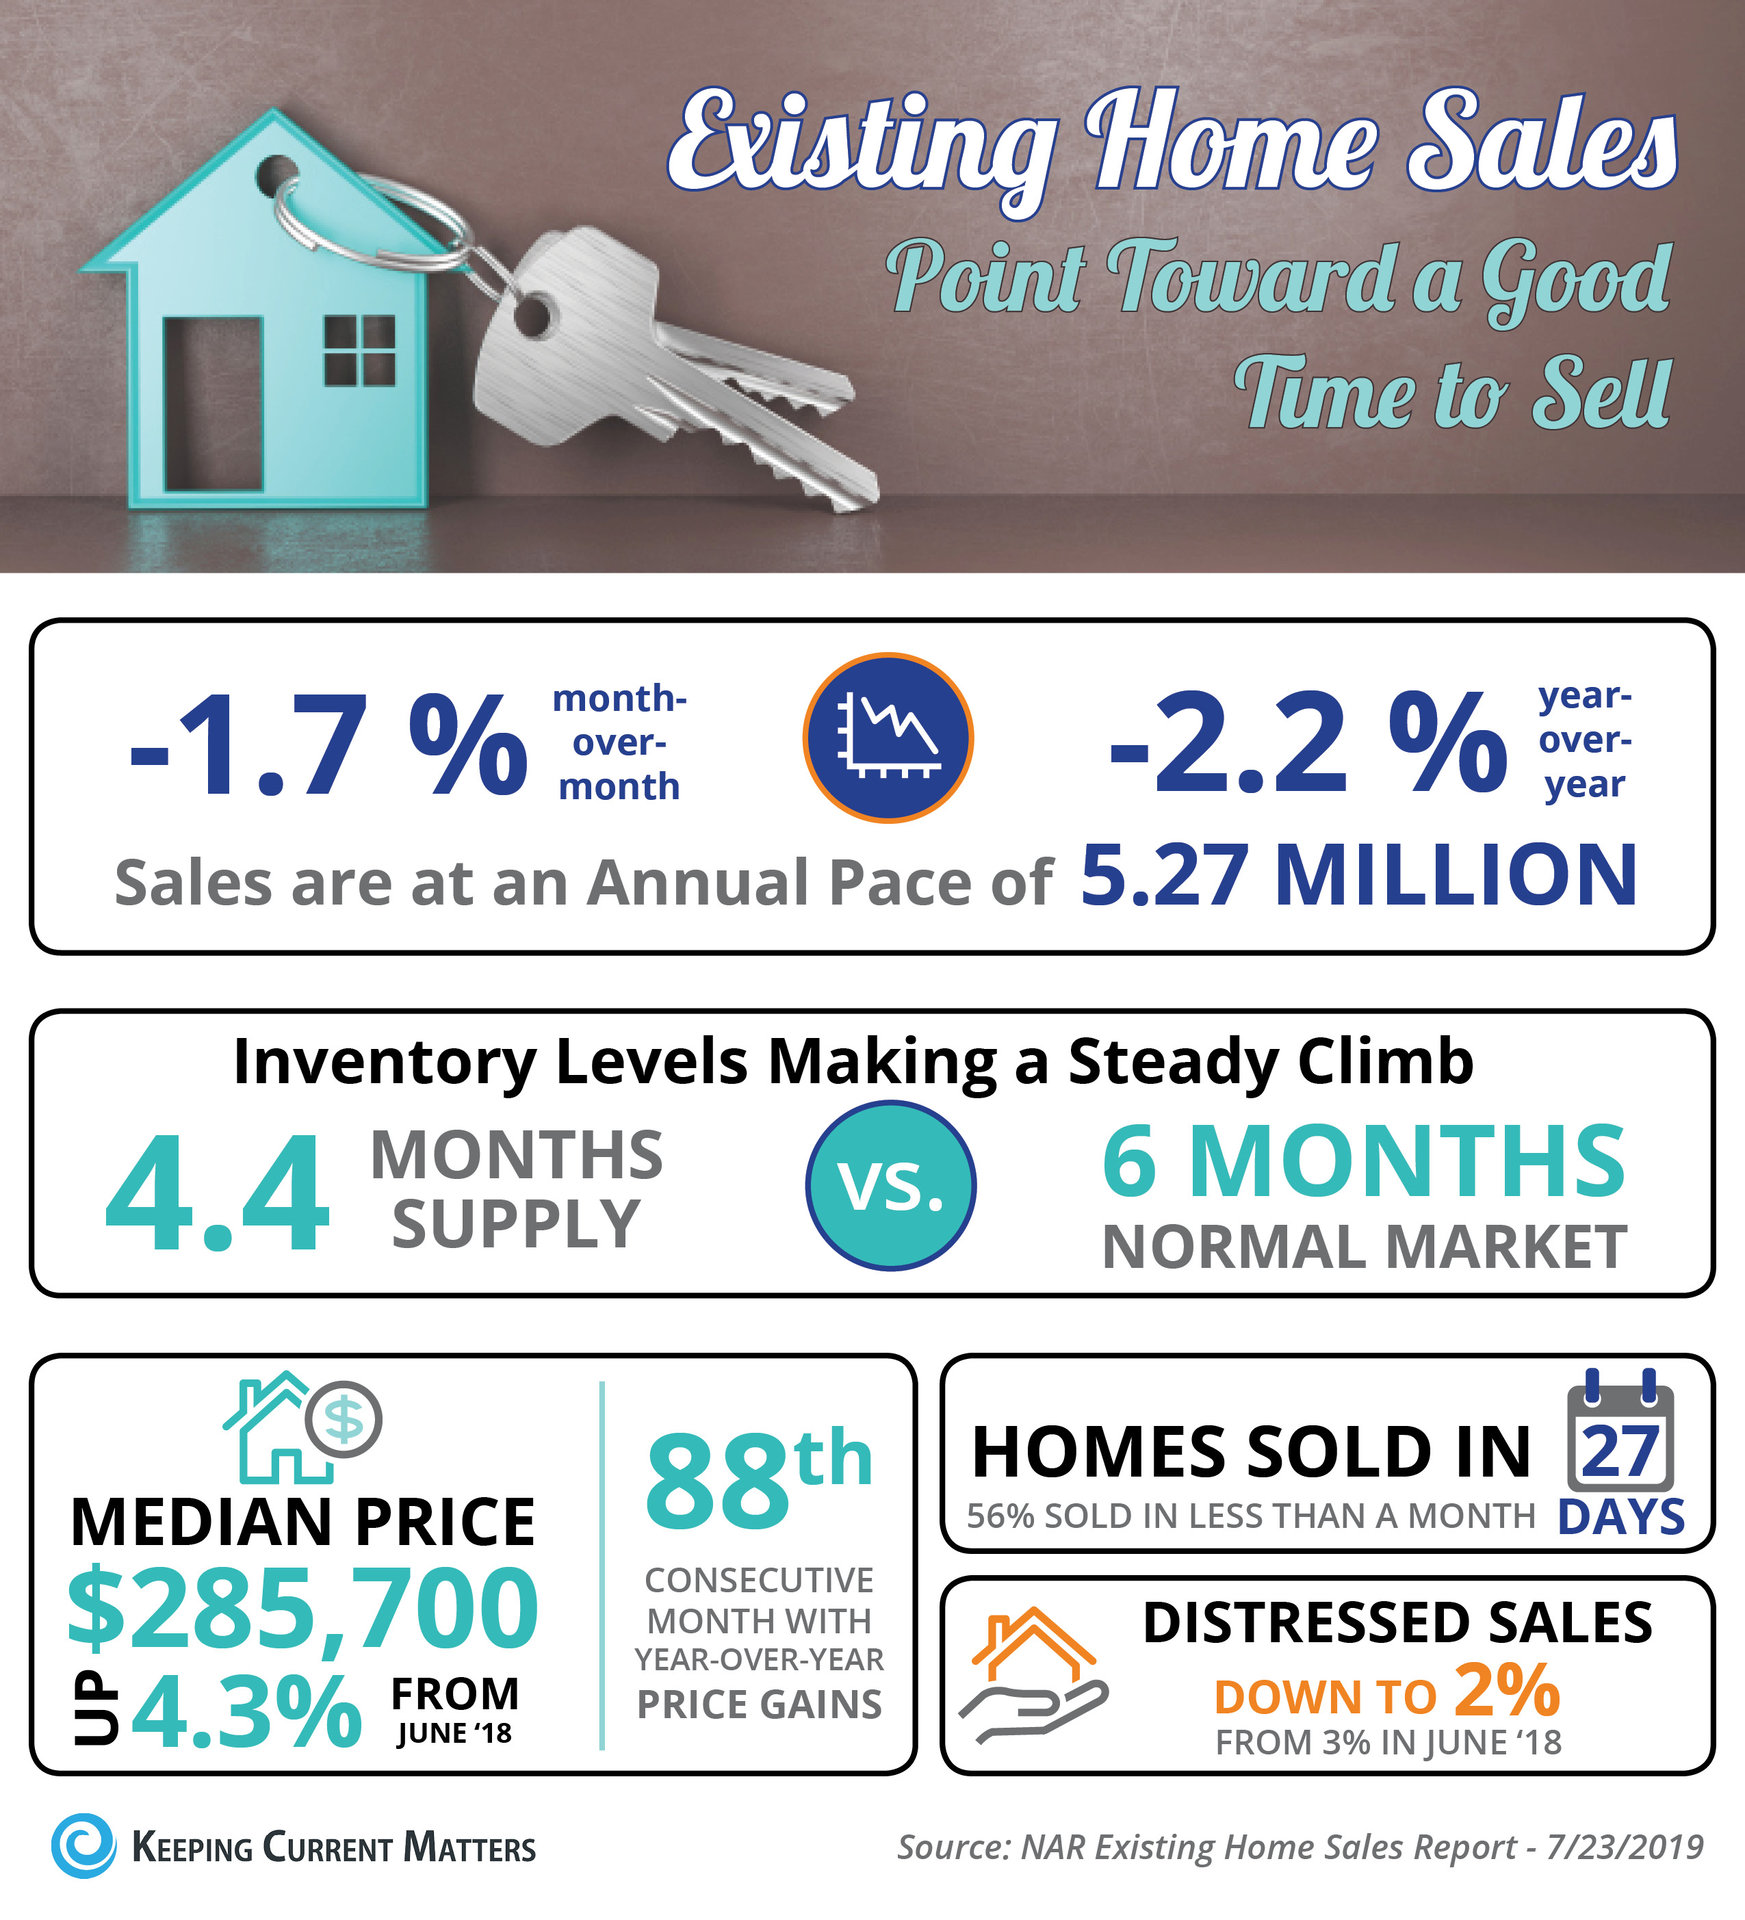 Existing Home Sales Point Toward a Good Time to Sell [INFOGRAPHIC] | Keeping Current Matters